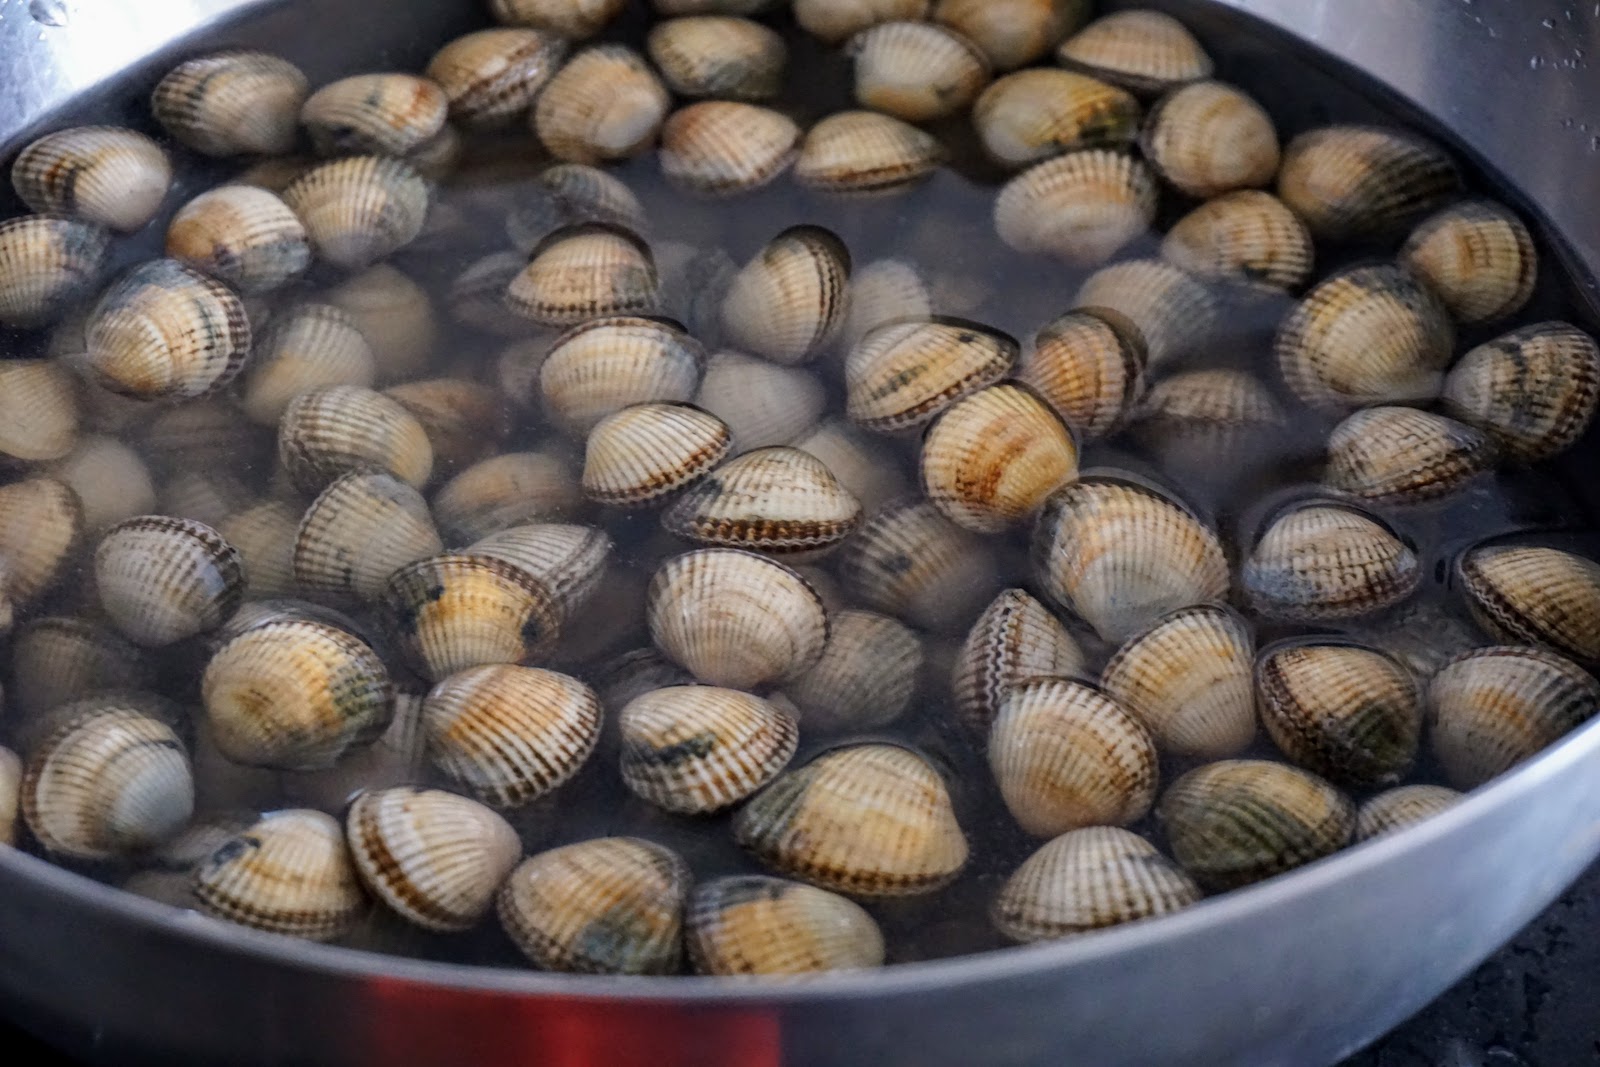 Clams soaked in water to eliminate sands